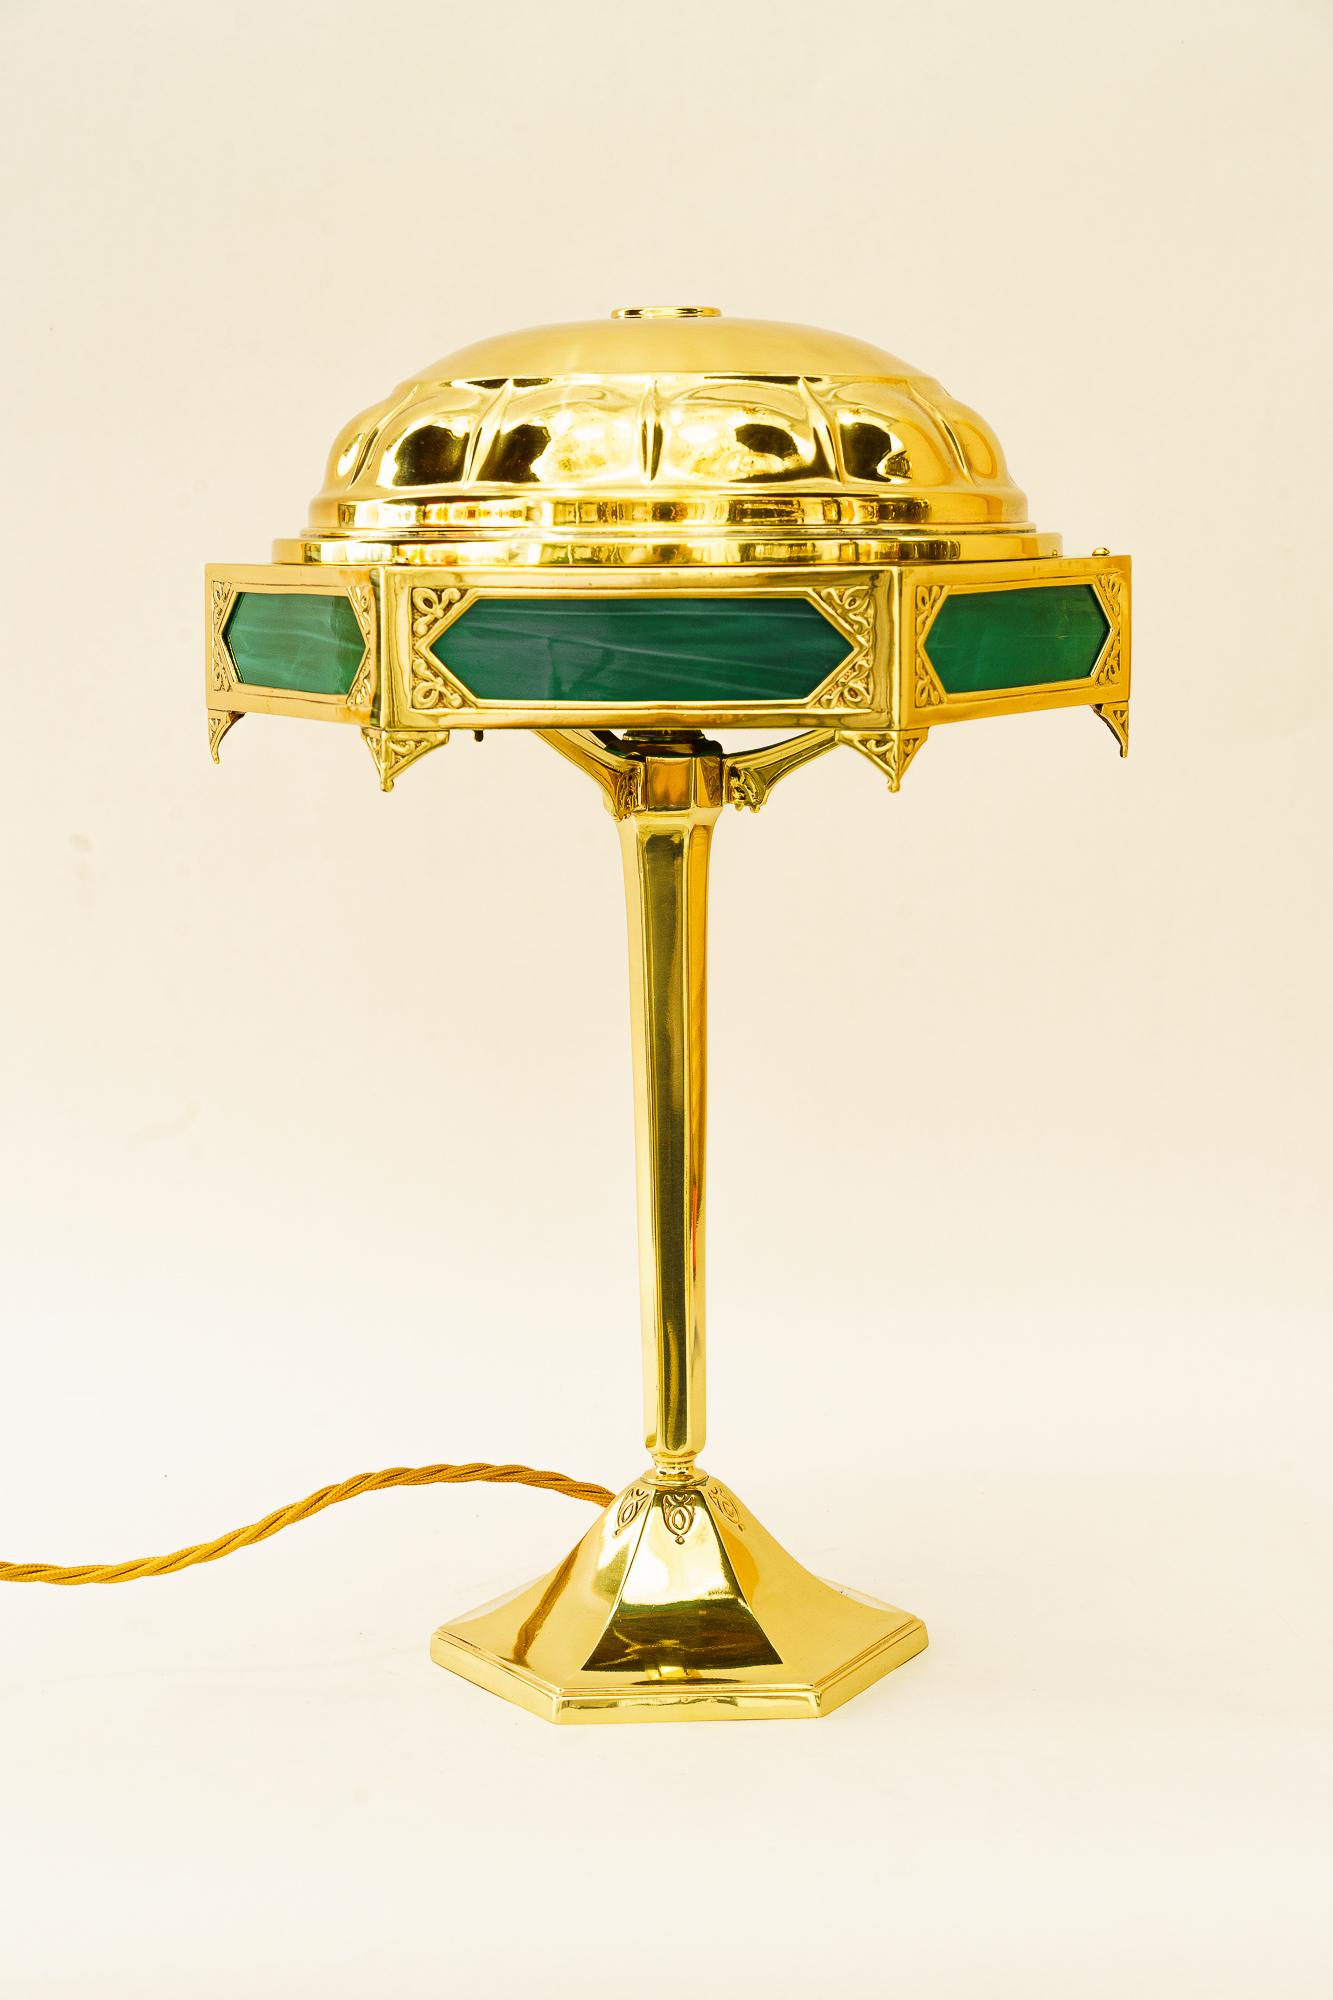 Art Deco table lamp with original antique opaline glass plates vienna around 1920s
Brass polished and stove enameled
